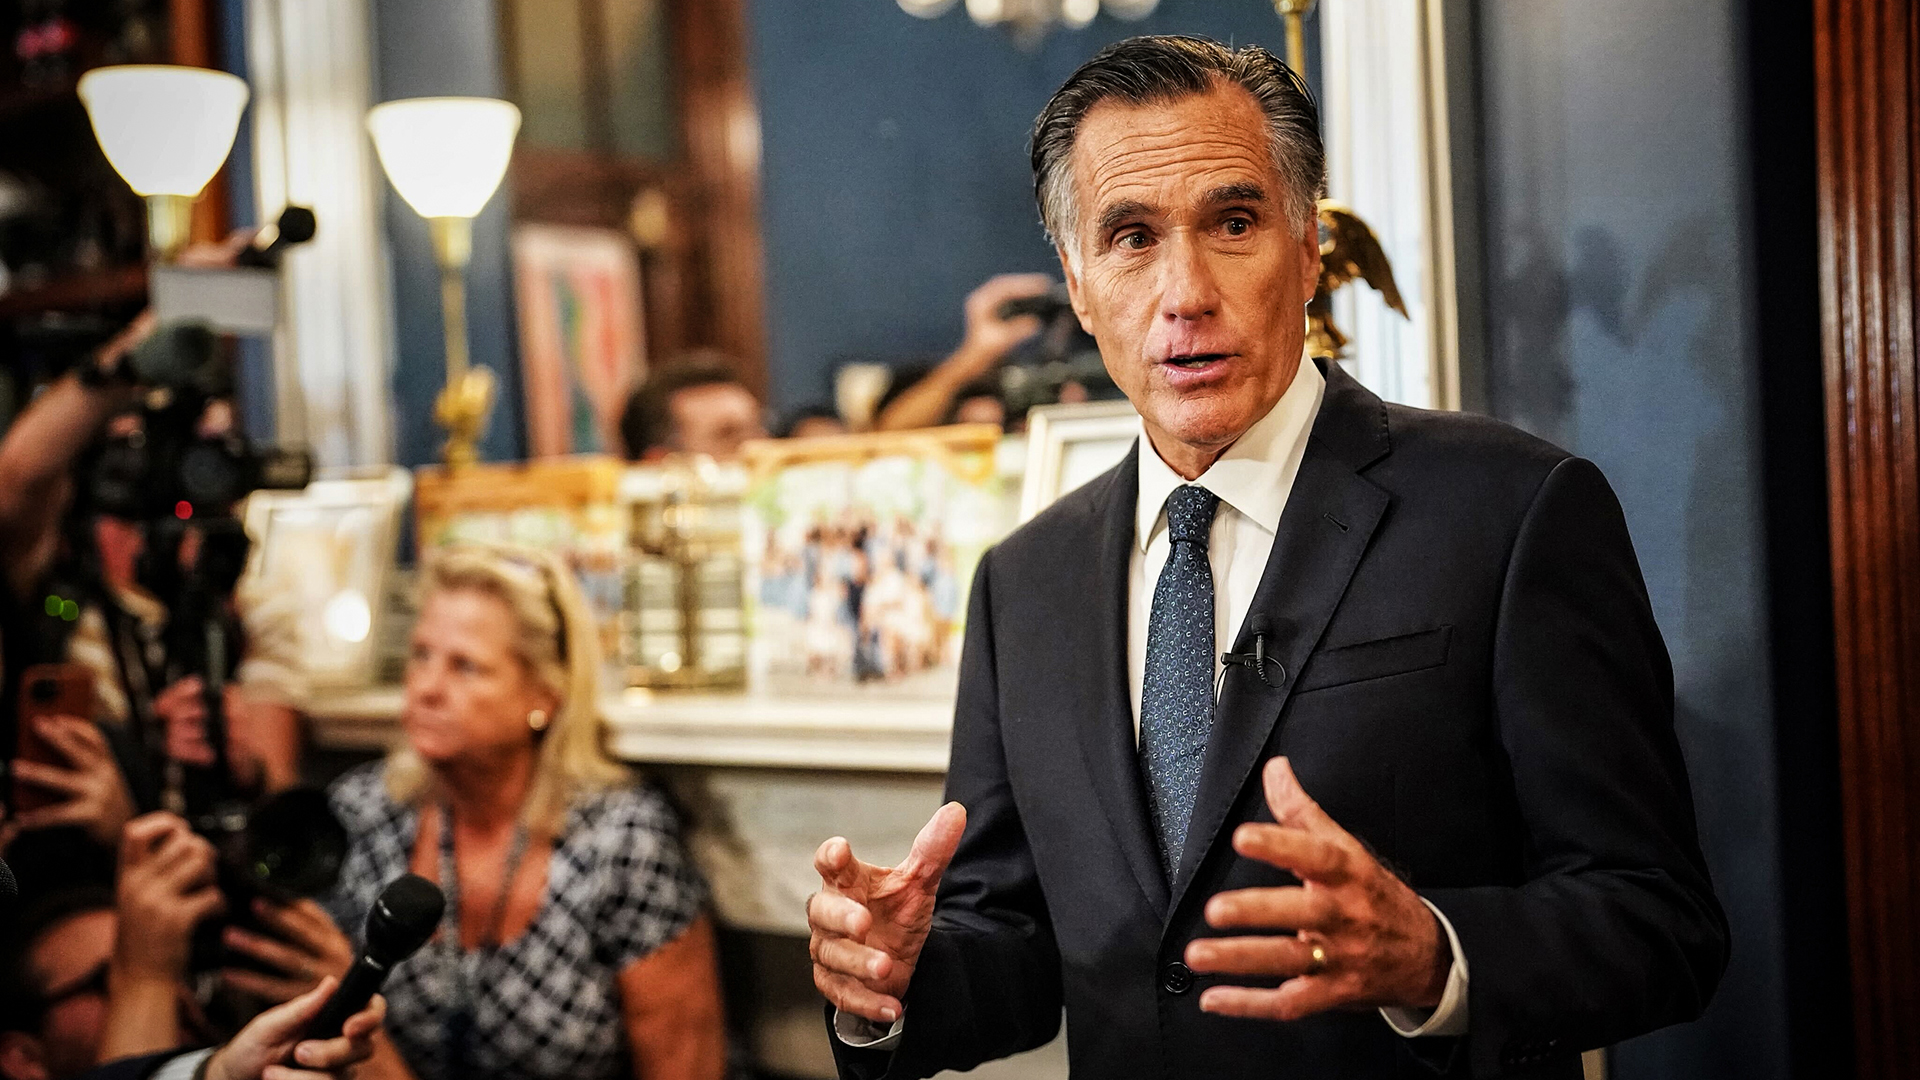 Time for 'next generation to step forward,' Sen. Romney says